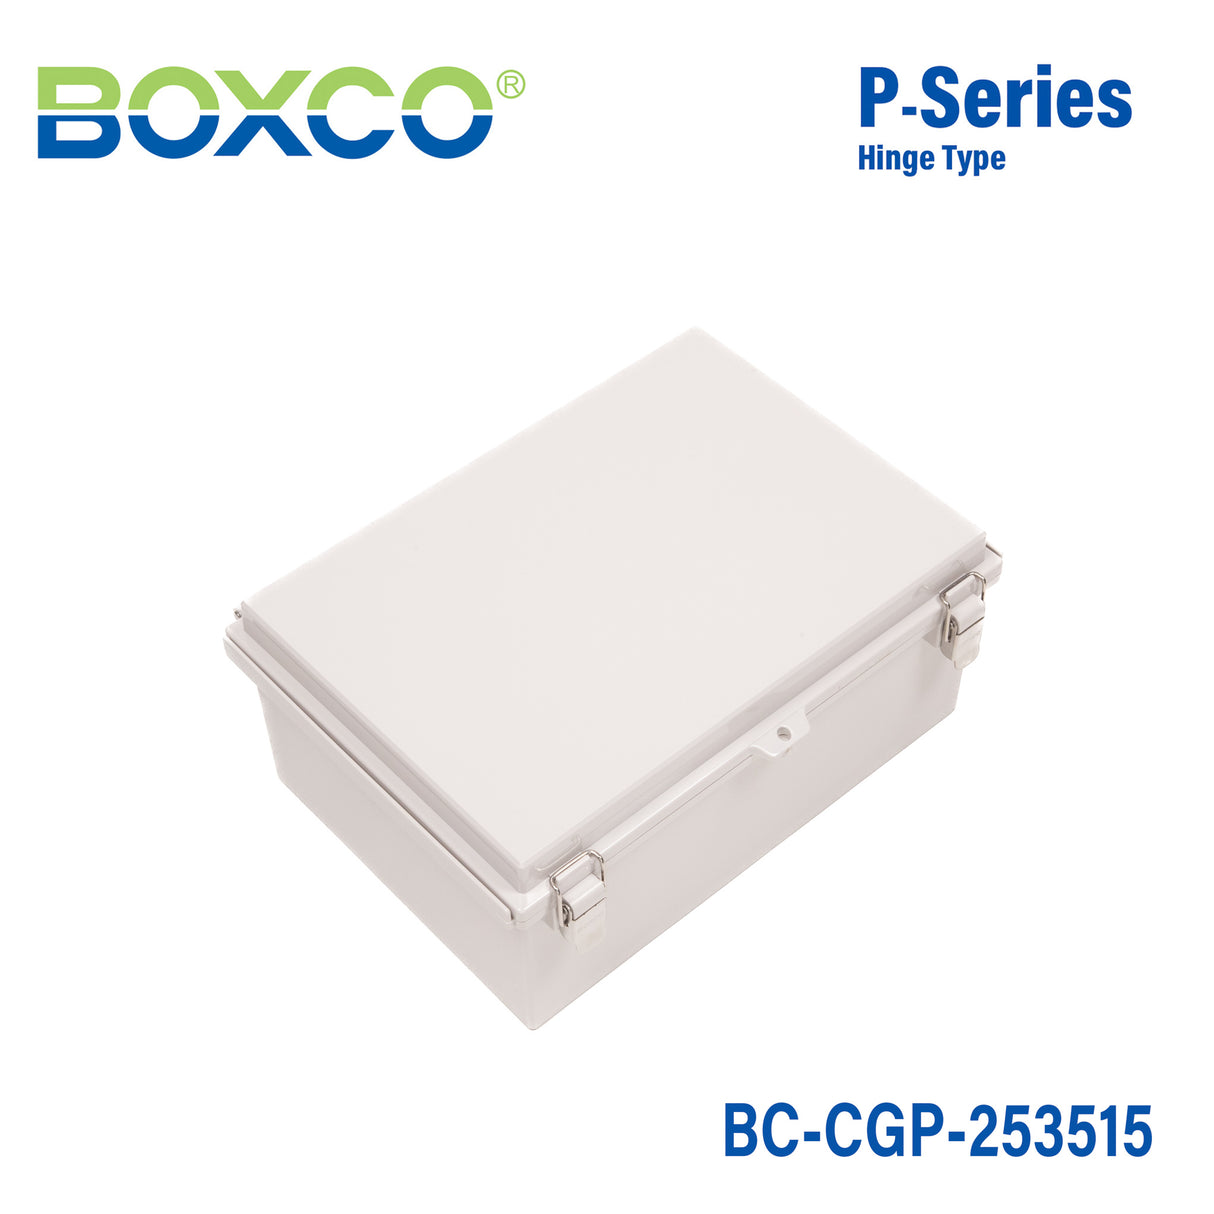 Boxco P-Series 250x350x150mm Plastic Enclosure, IP67, IK08, PC, Grey Cover, Molded Hinge and Latch Type